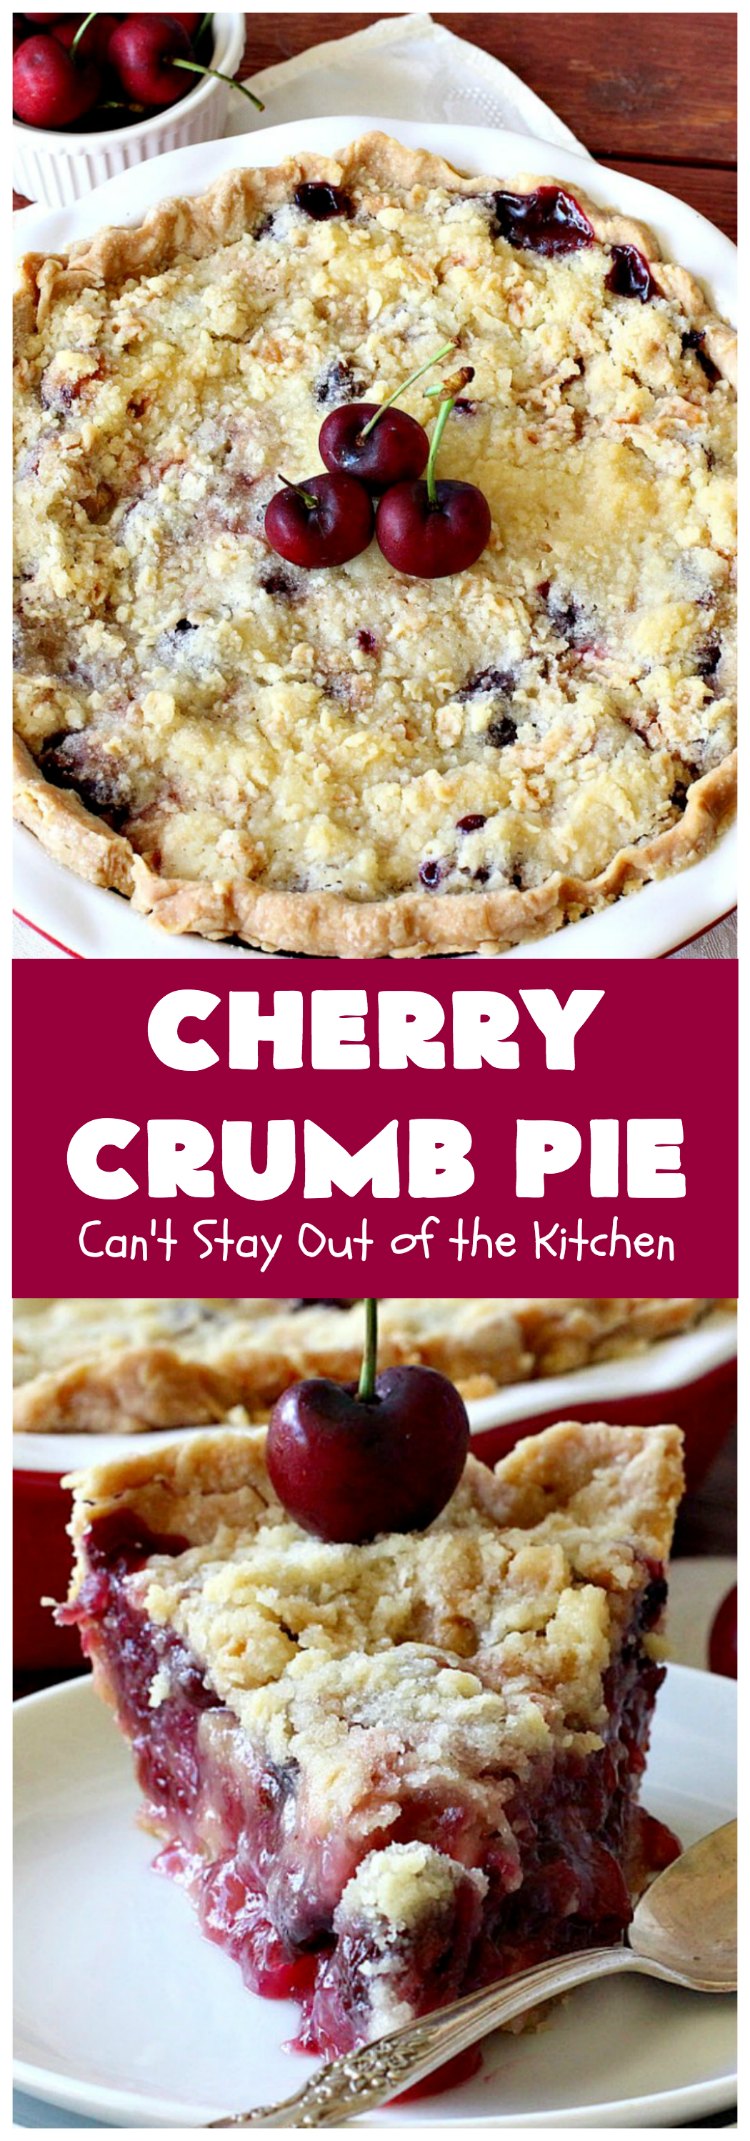 Cherry Crumb Pie | Can't Stay Out of the Kitchen | My Mom's delicious #recipe. This #pie is so drool-worthy & mouthwatering you'll be hard pressed to stay out of it! Perfect for a #summer #dessert when #FreshCherries are in season. #FourthOfJuly #Cherries #CherryPie #CherryCrumbPie #CherryDessert #Canbassador #NWCherries #NorthwestCherryGrowers 